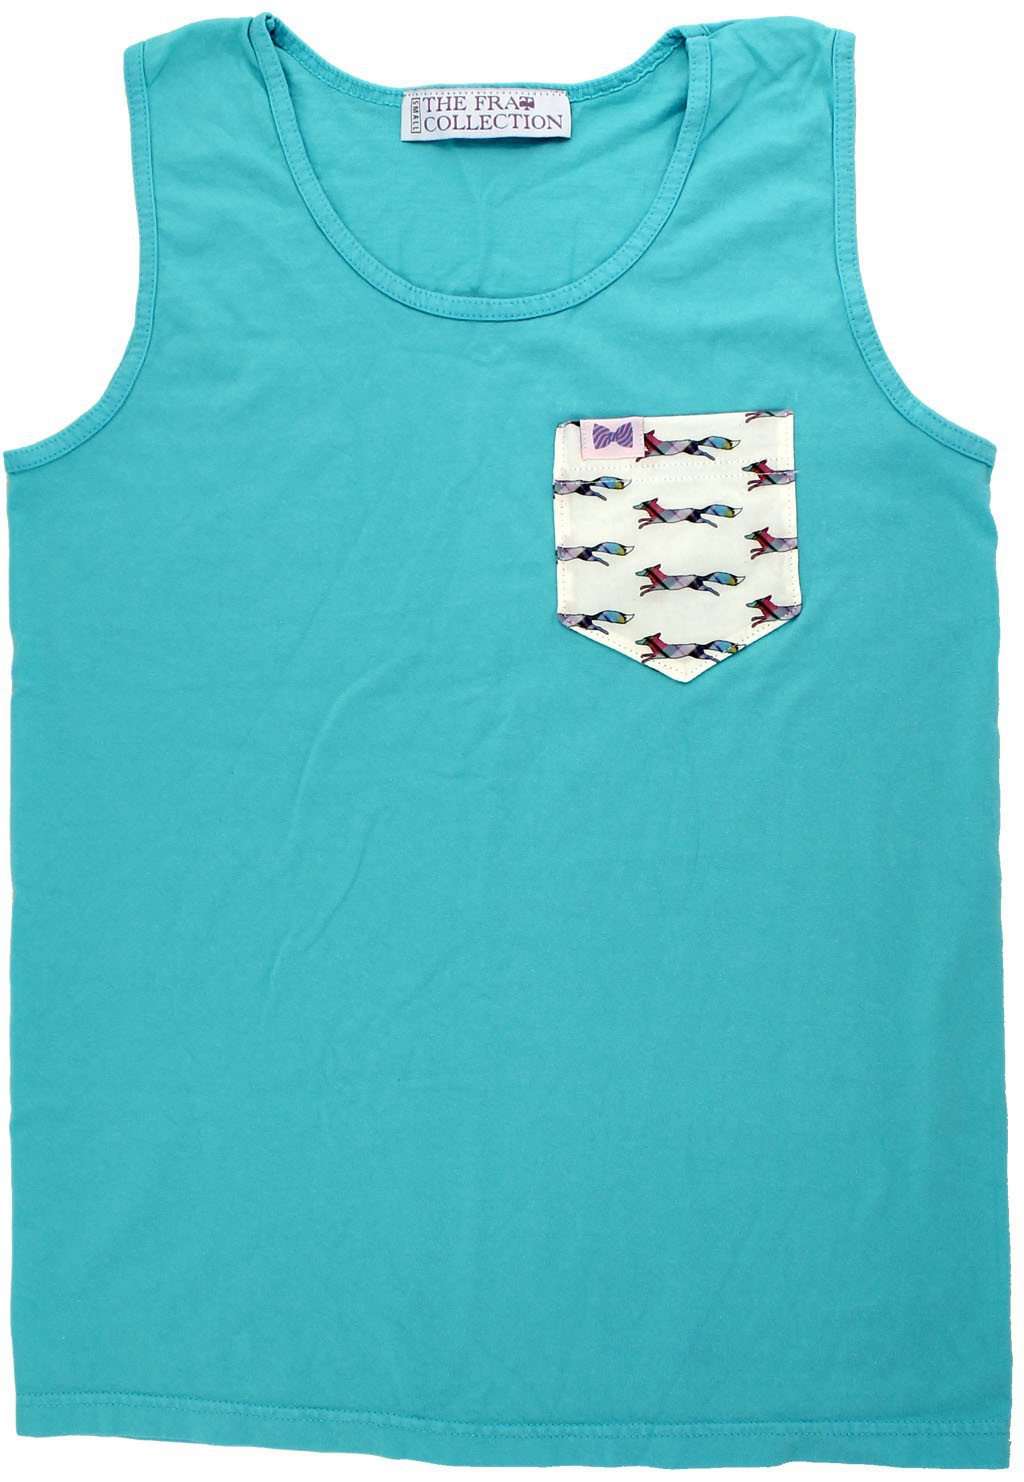 The Limited Edition Longshanks Unisex Tank Top in Marlin Lagoon Blue/Green by the Frat Collection - Country Club Prep